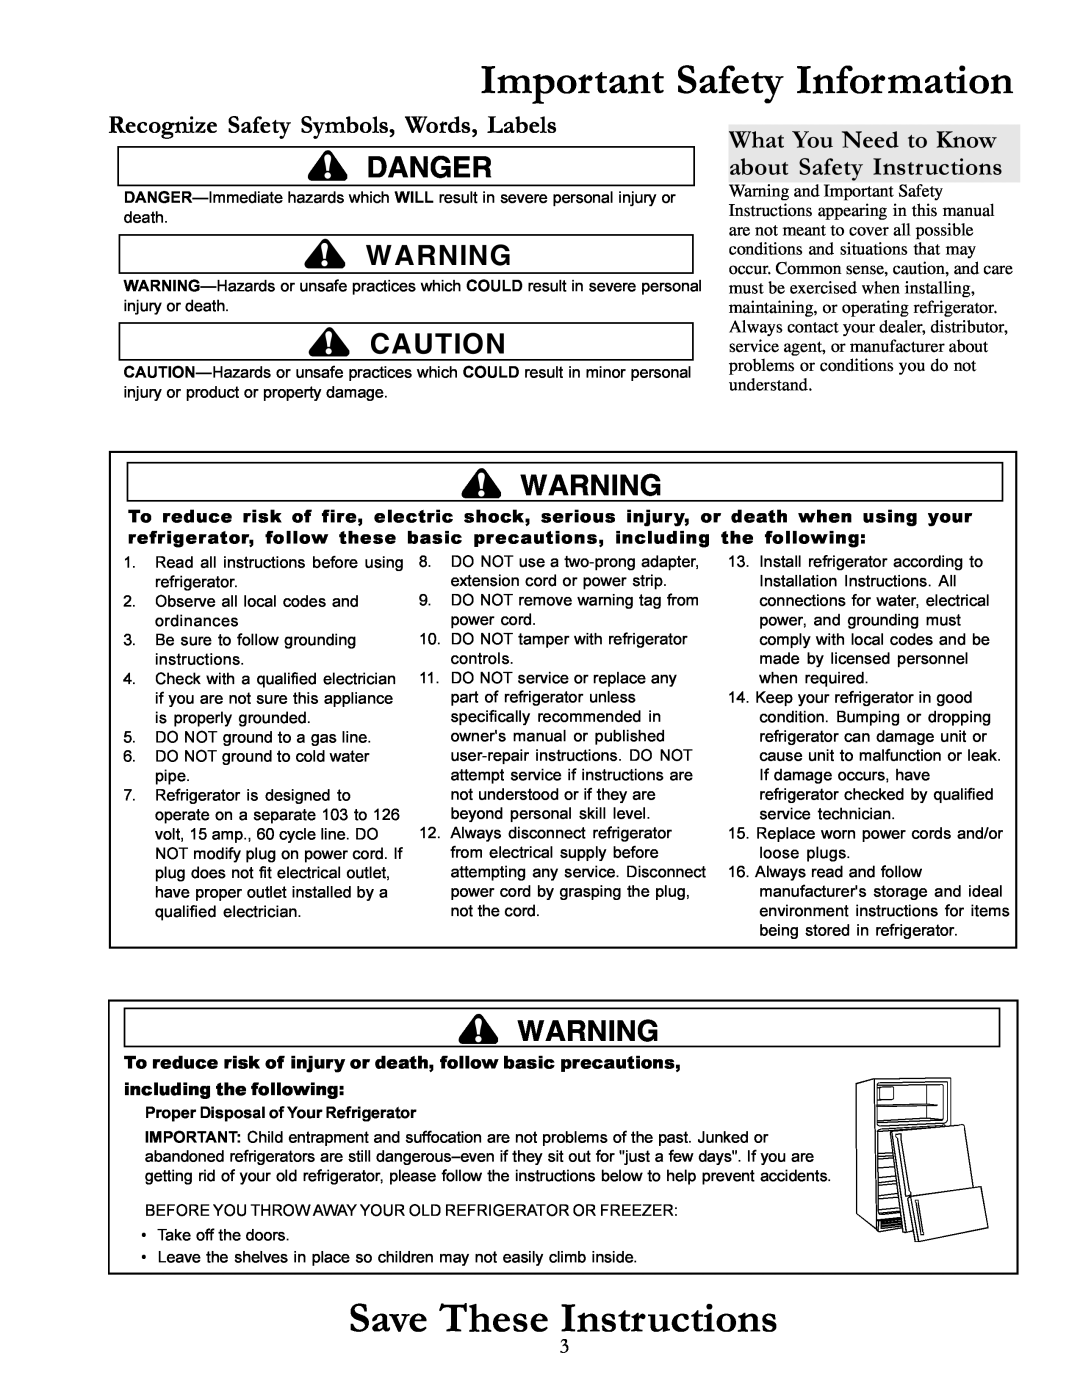 Amana DRS2663BW Important Safety Information, Save These Instructions, Danger, Recognize Safety Symbols, Words, Labels 